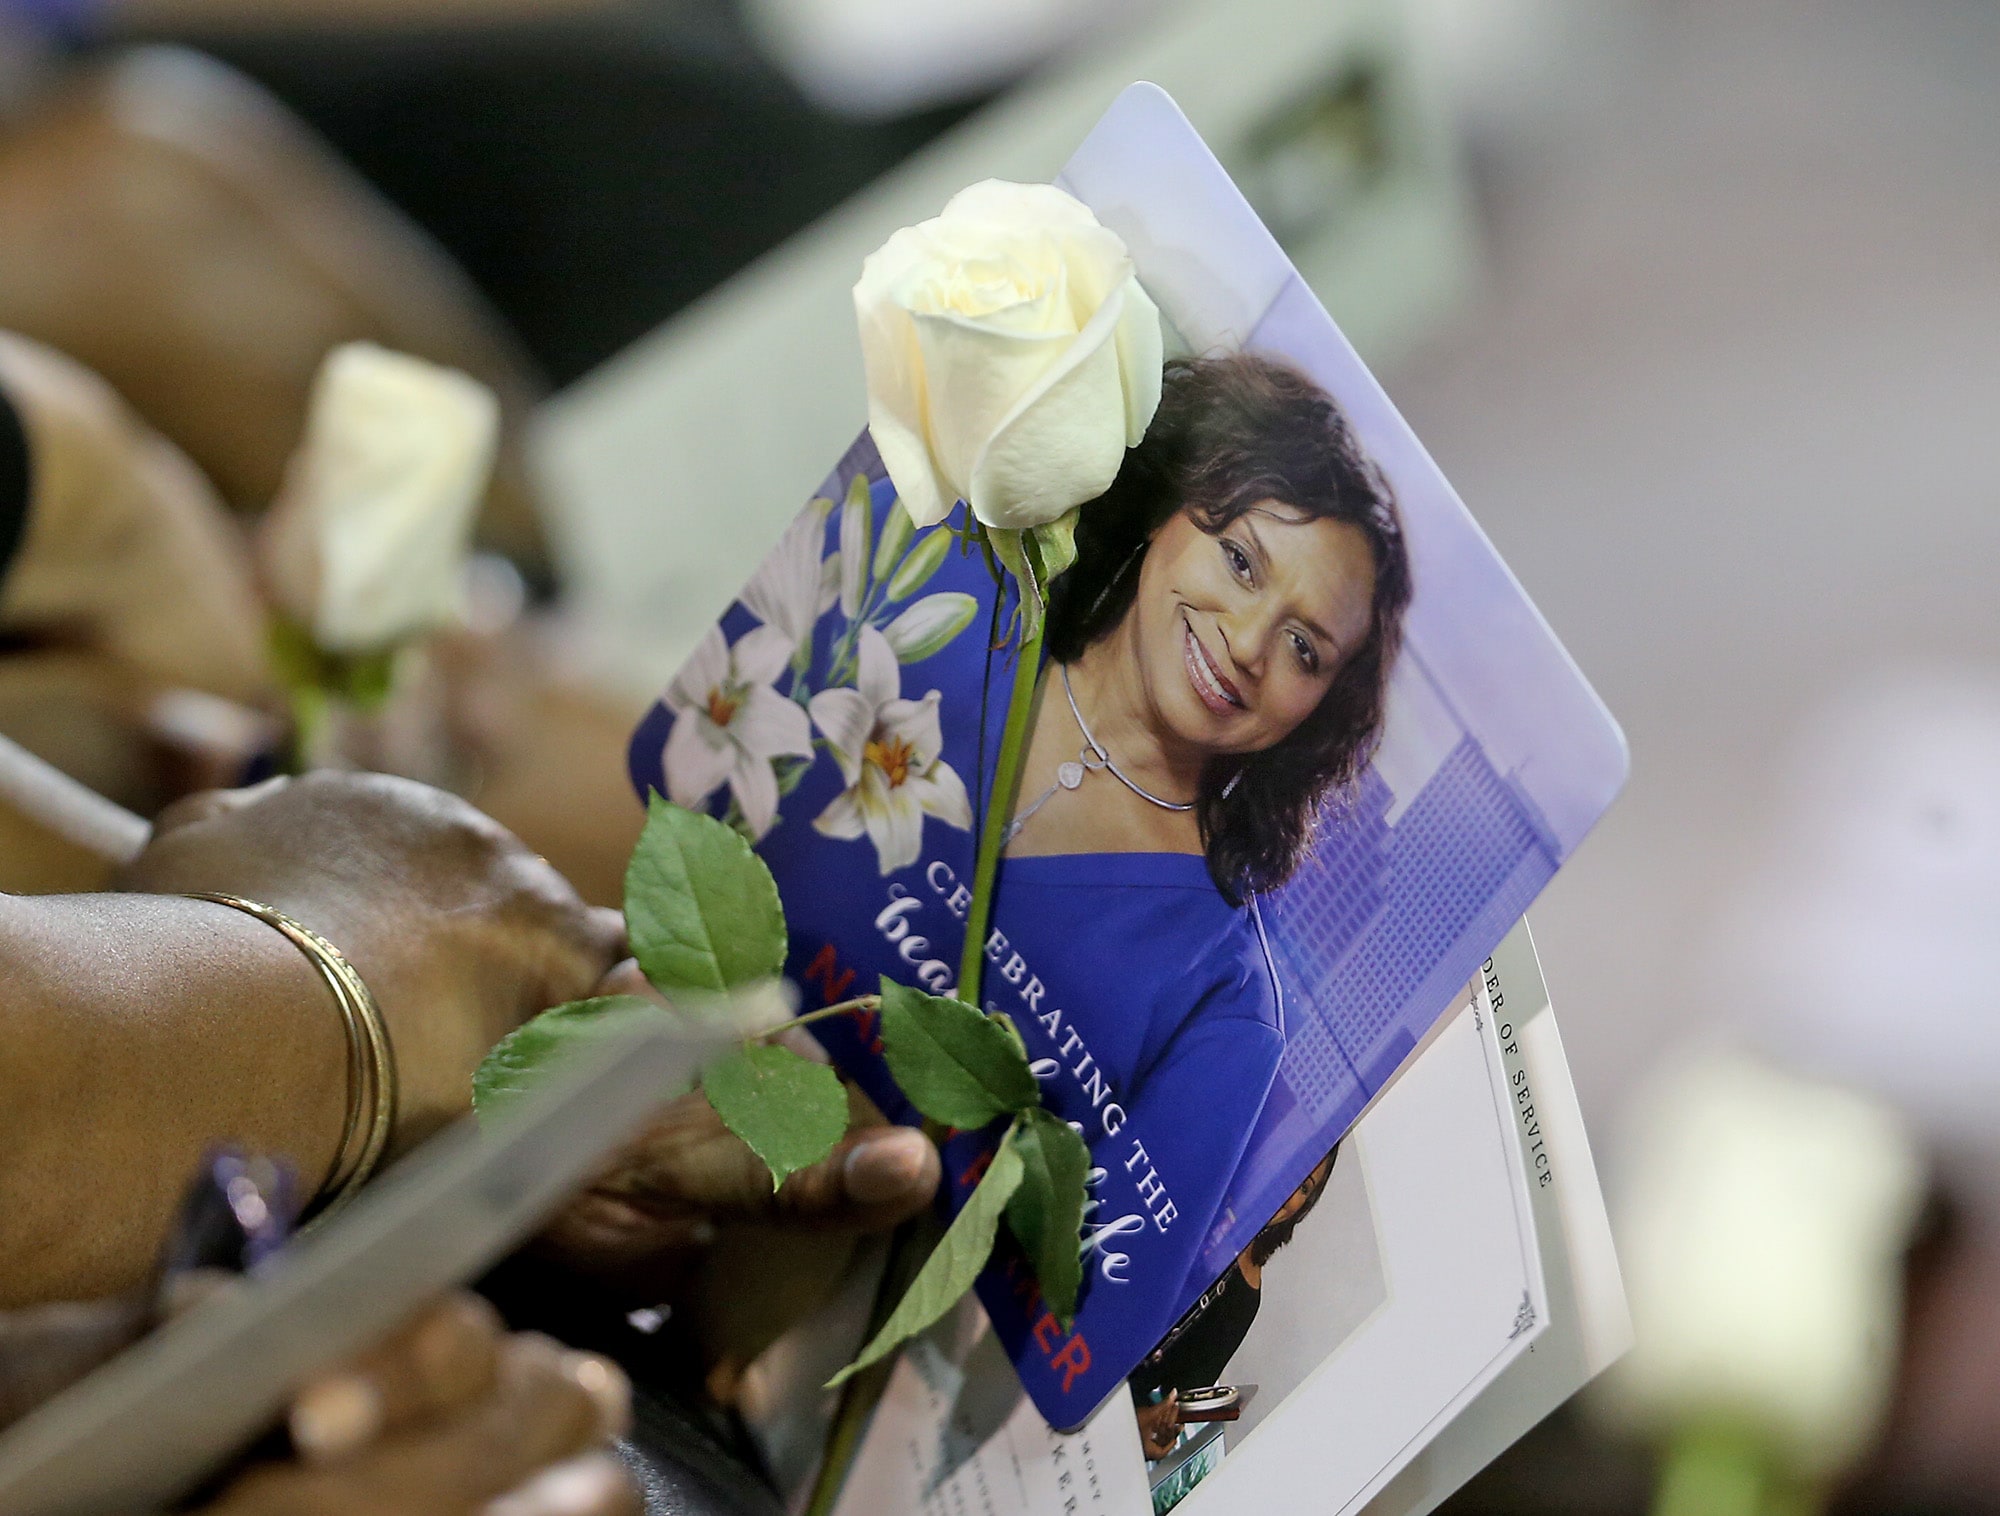 Flowers and photos during the public memorial service at the Xavier Convocation Center for Fox 8 journalist and anchor Nancy Parker who was killed last week in a small plane crash while working on a story. (Photo by Michael DeMocker)